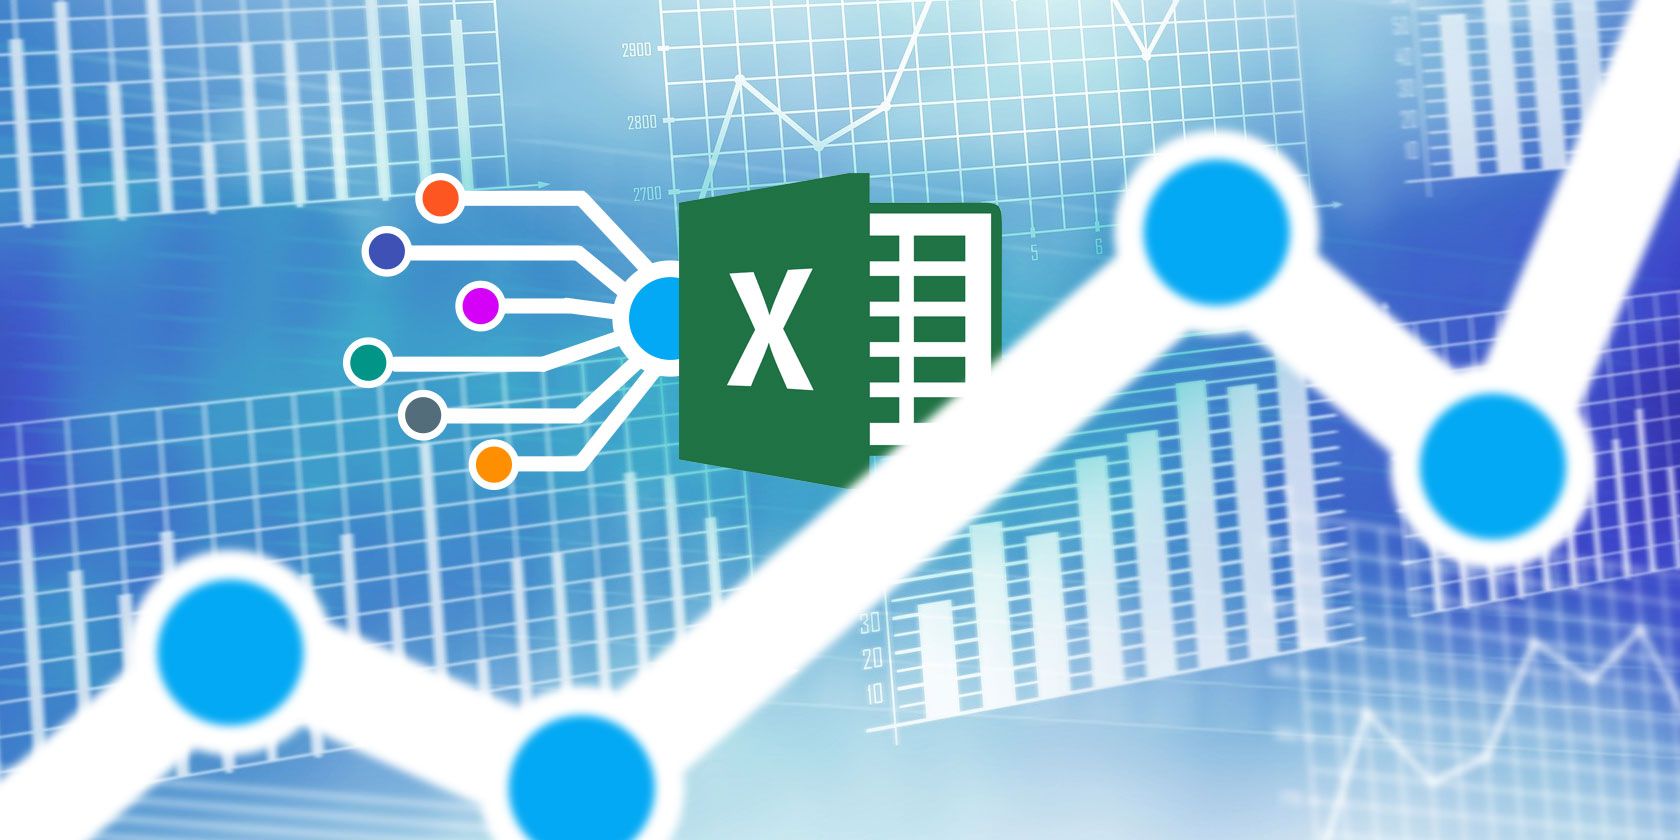 can you add data analysis toolpak to excel for mac